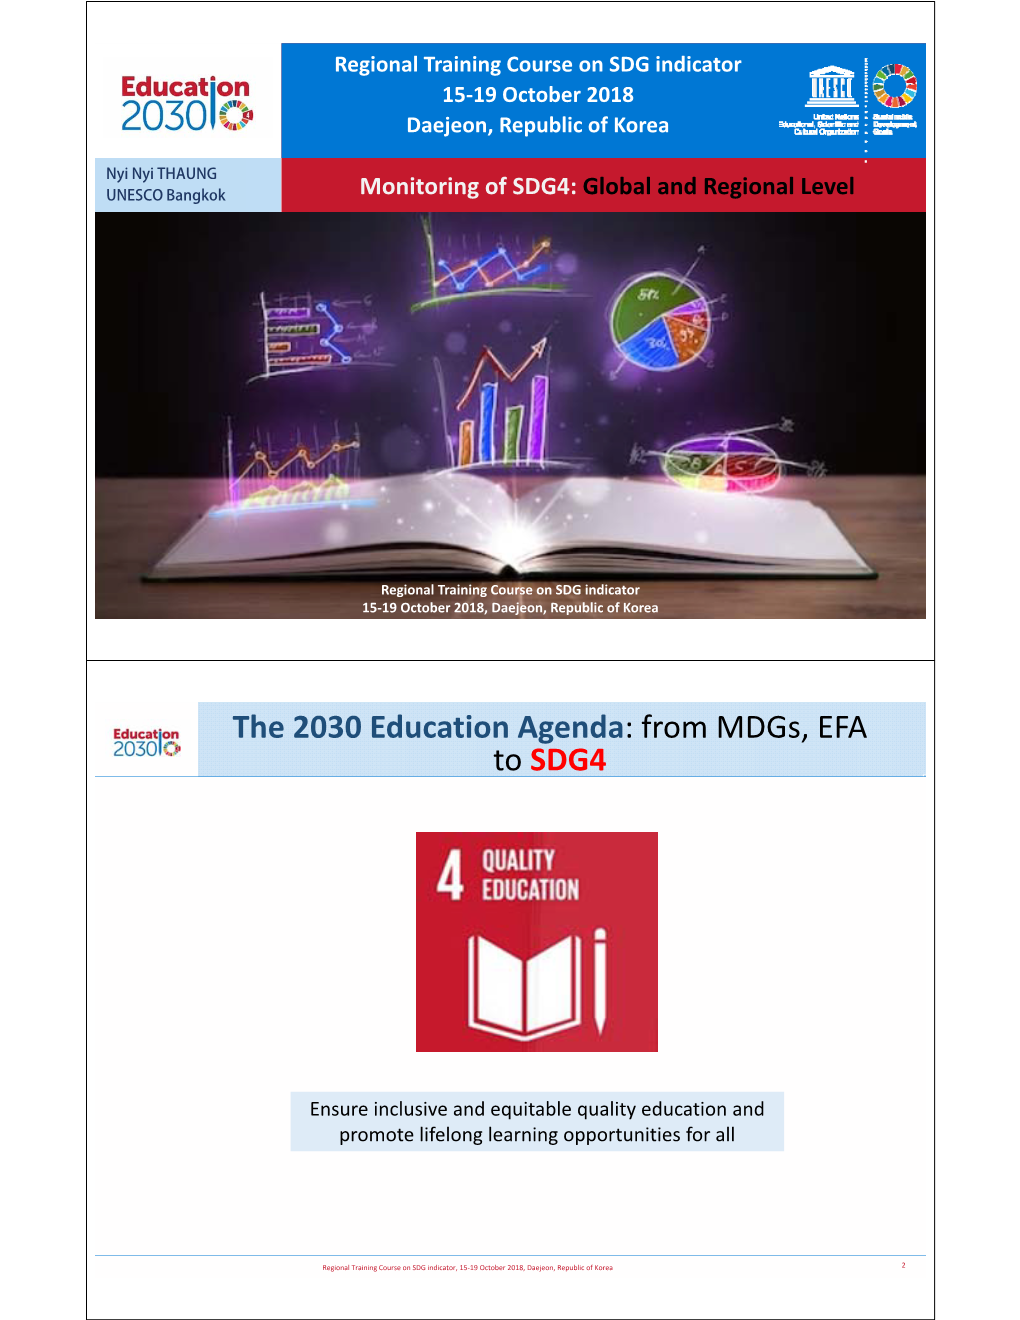 The 2030 Education Agenda: from Mdgs, EFA to SDG4